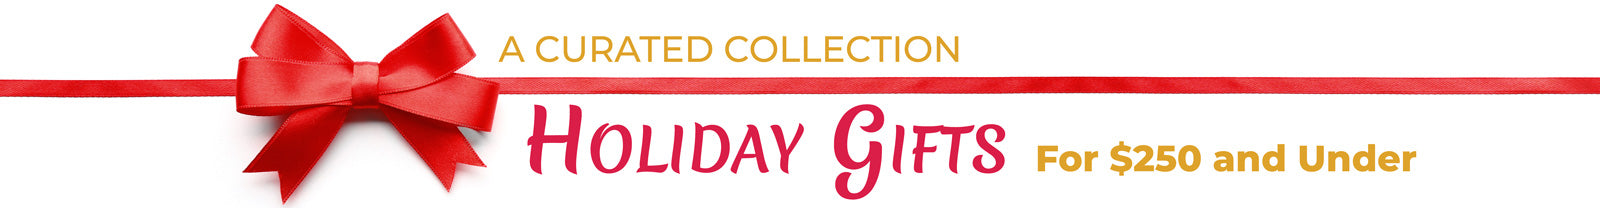 A CURATED COLLECTION: Stunning Gifts for $250 and Under